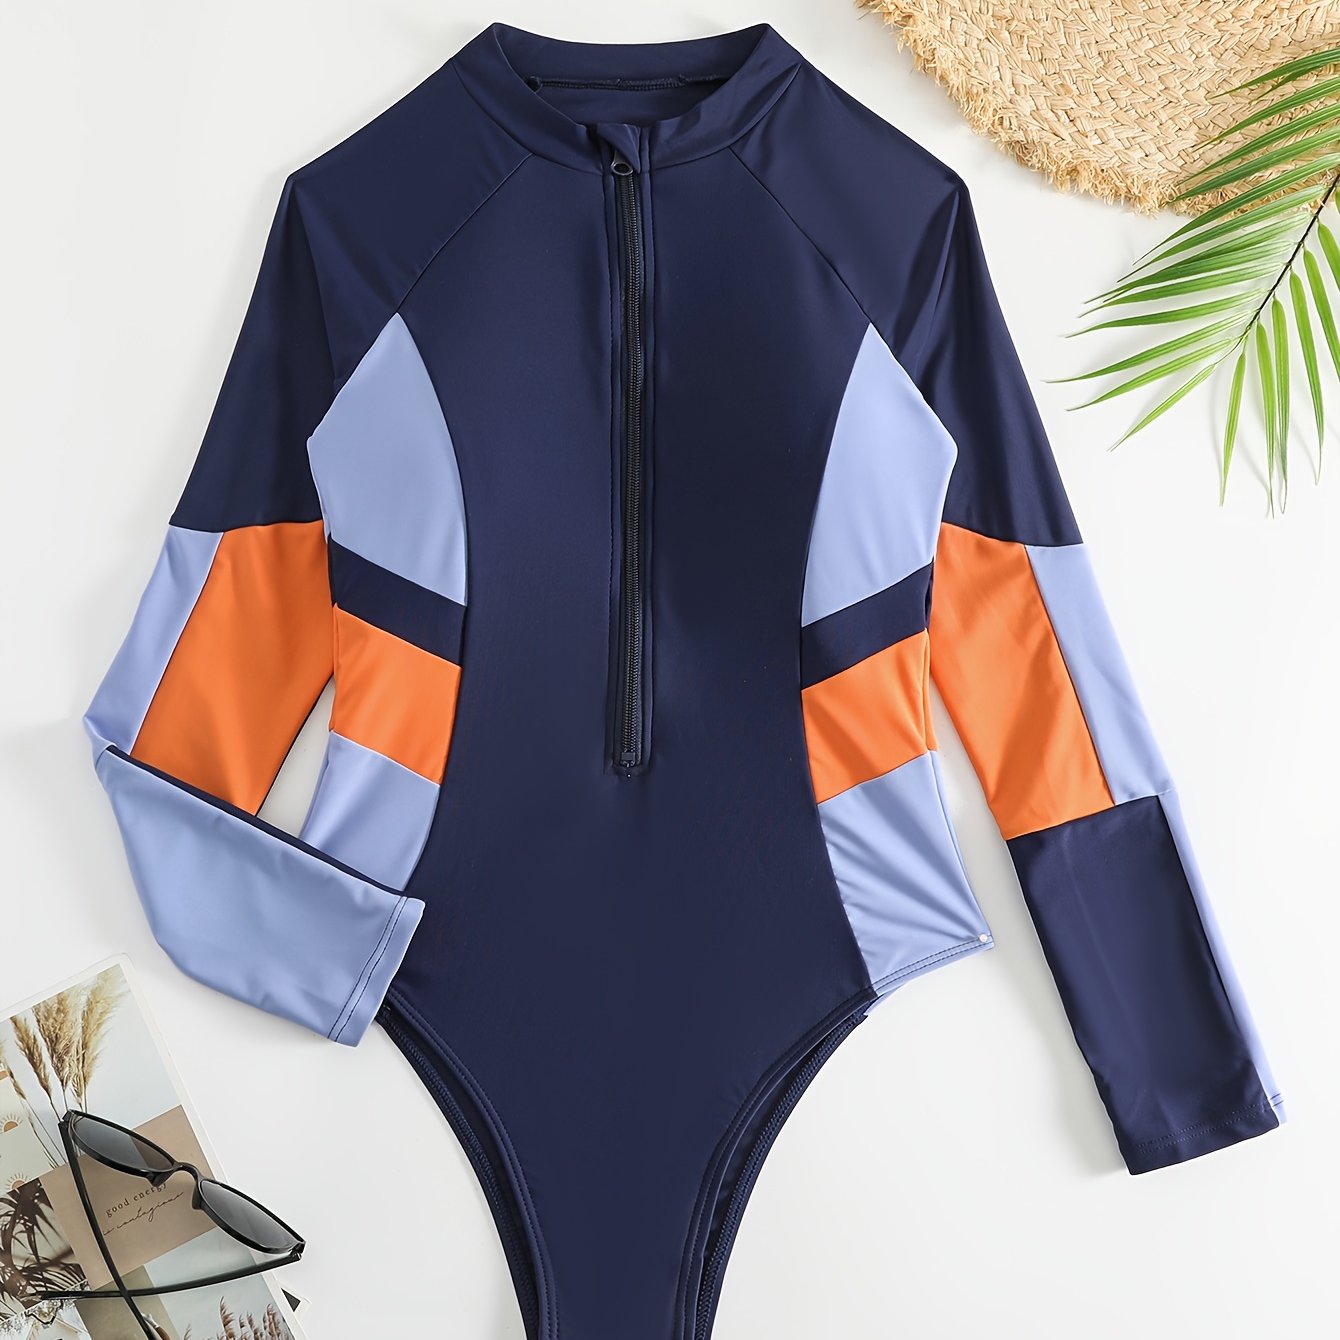 Color Block Zipper * Swimsuit, Shorts Sleeve Stretchy Boy Shorts Rush Guard  For Water Sports, Women's Swimwear & Clothing